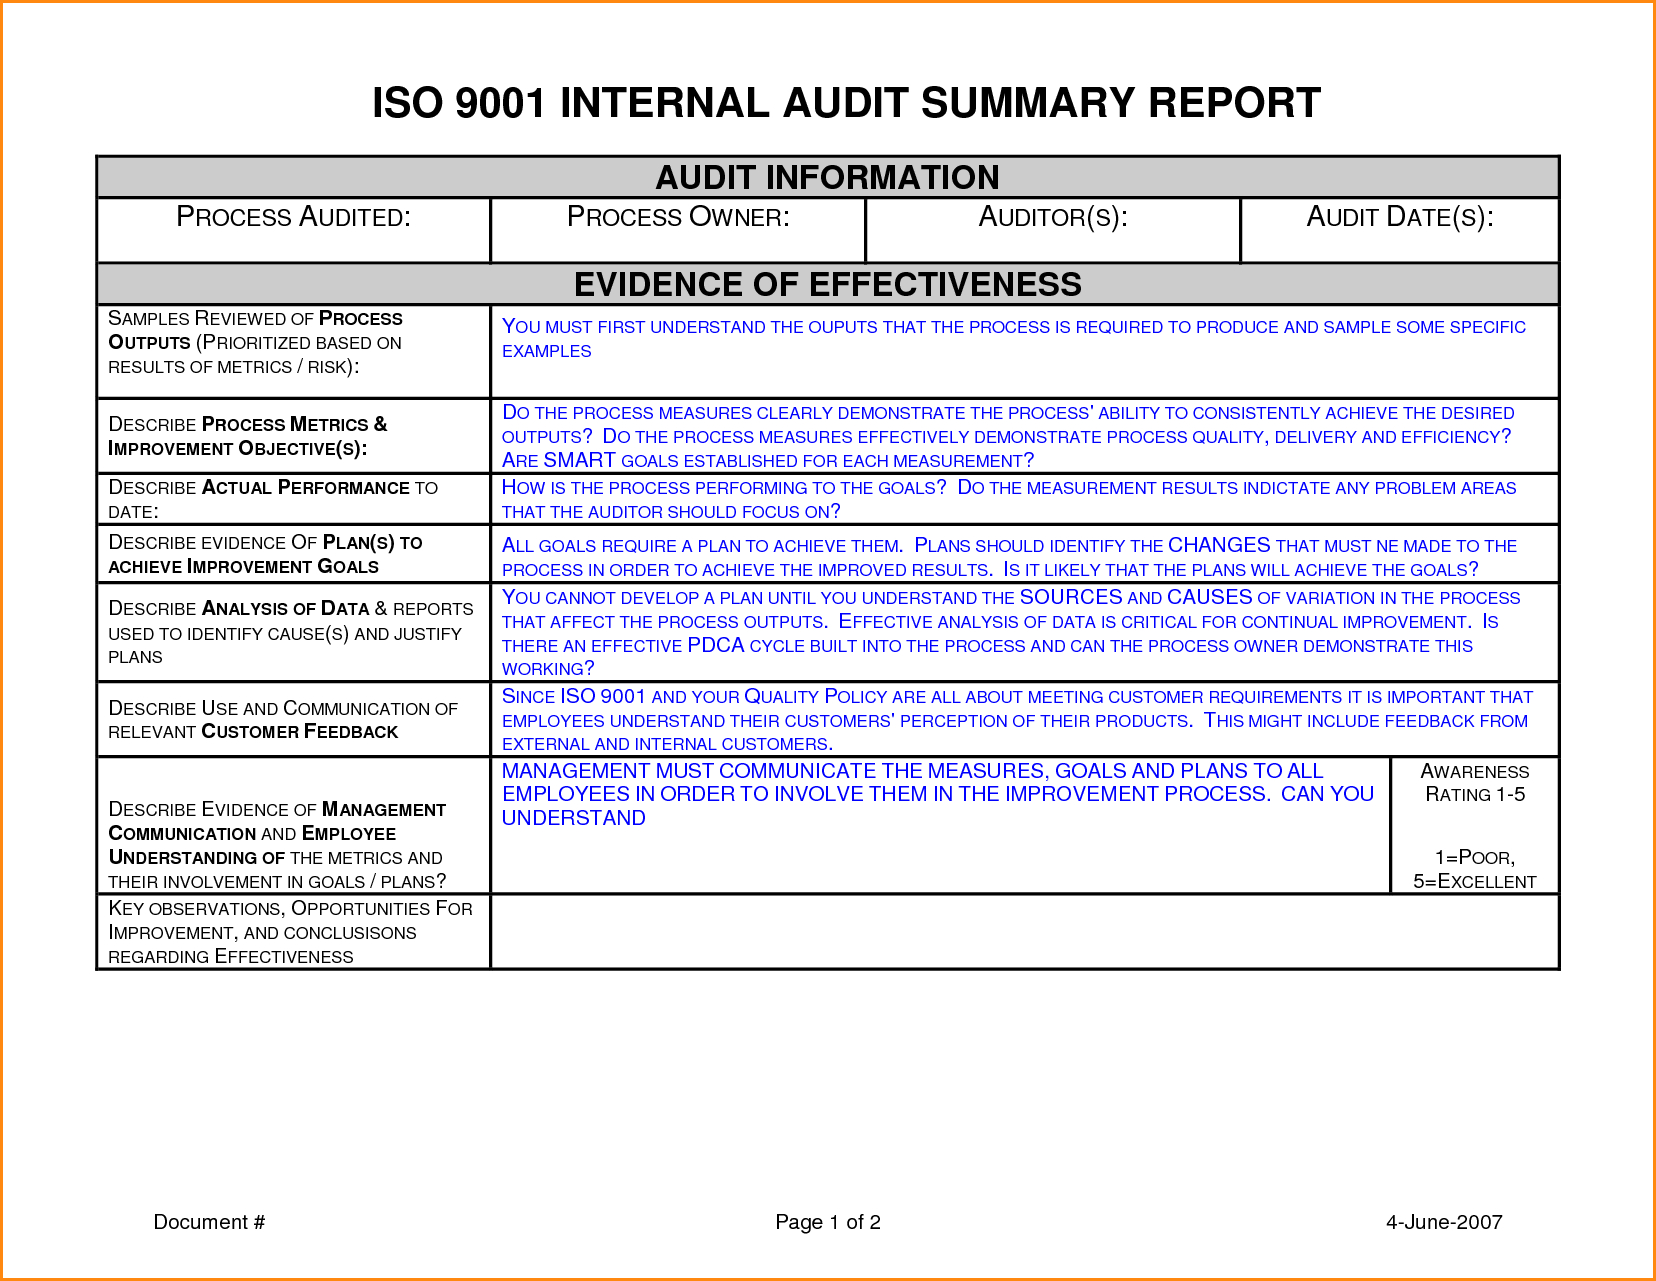 Internal Audit Report Template Iso 9001 12 Important Facts Throughout Internal Audit Report Template Iso 9001